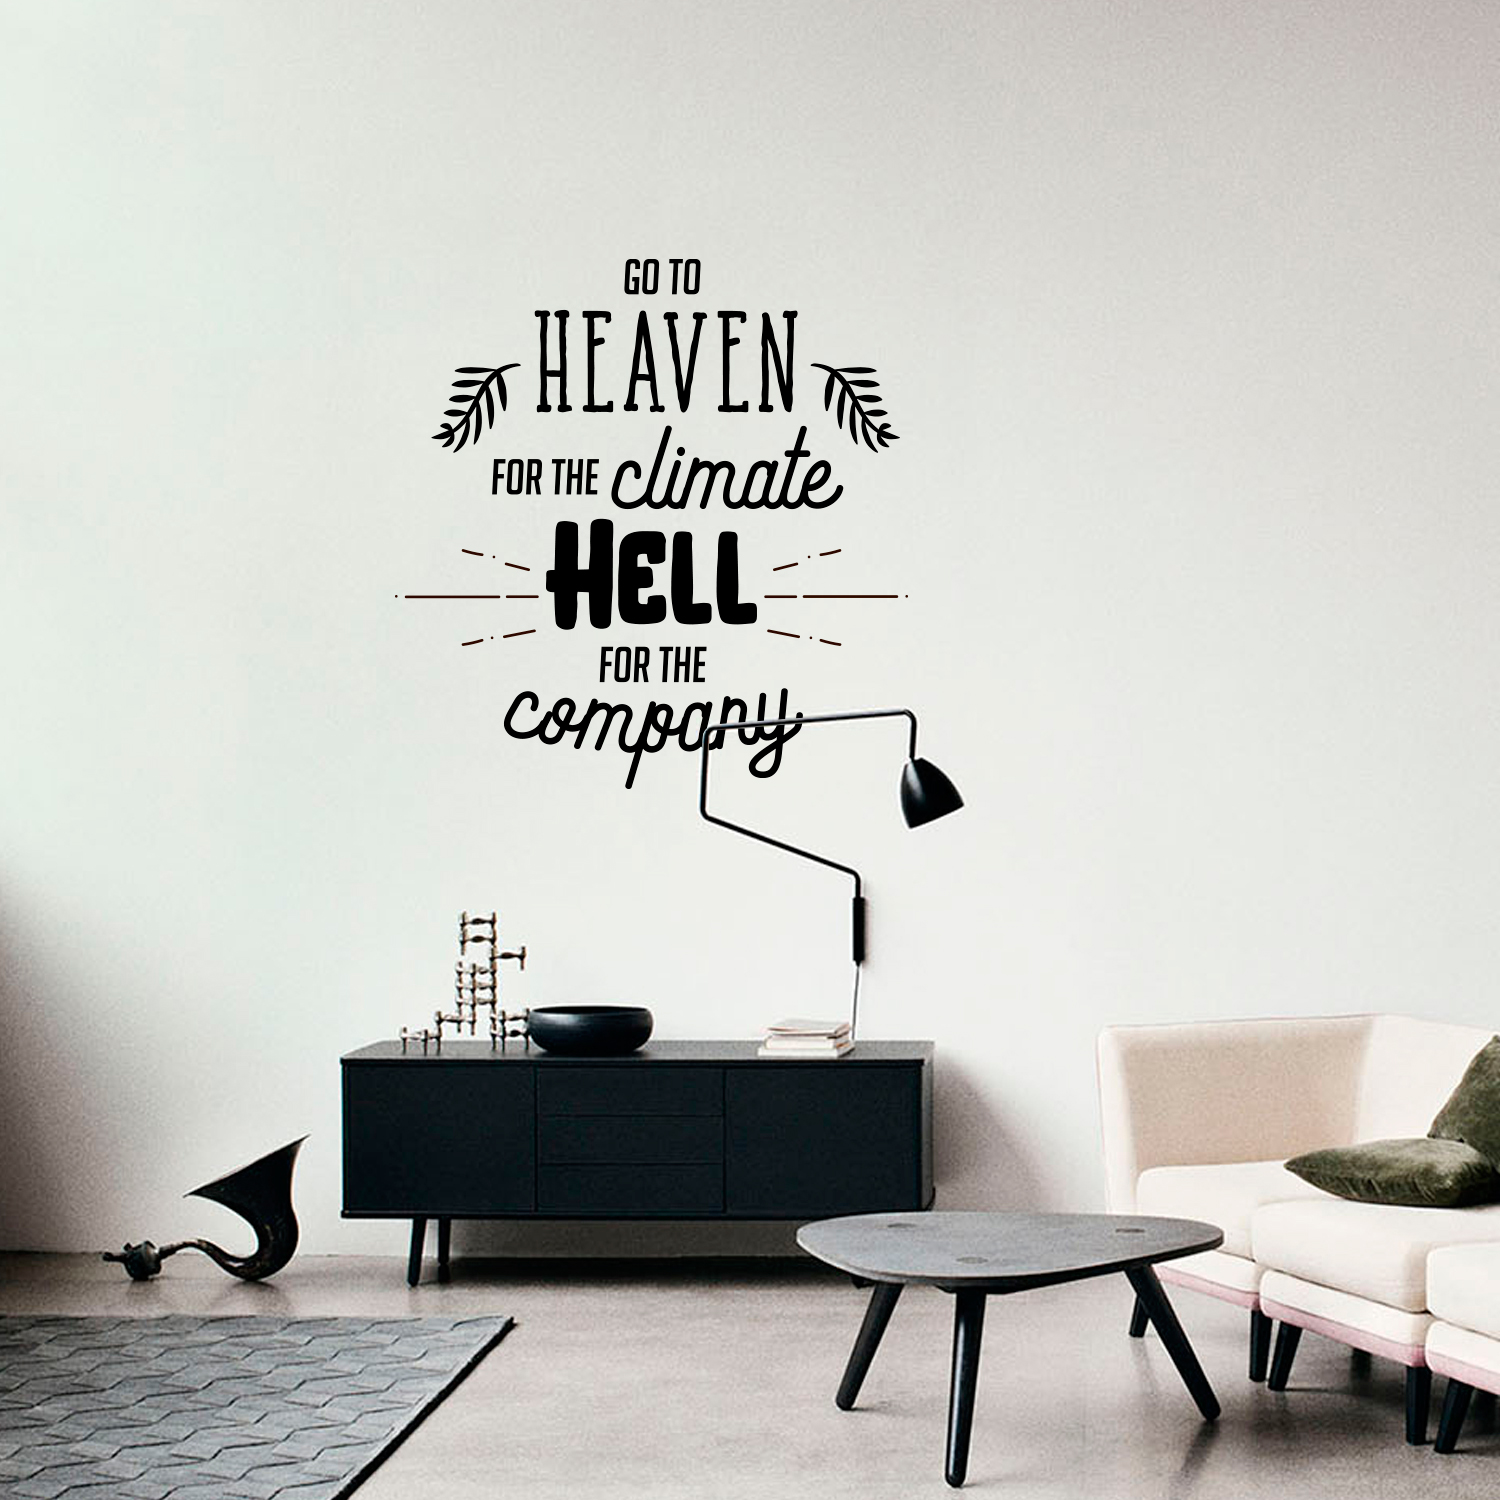 Vinyl Wall Art Decal Go To Heaven Funny Inspirational Quotes 23 X 22 660078142295 Ebay